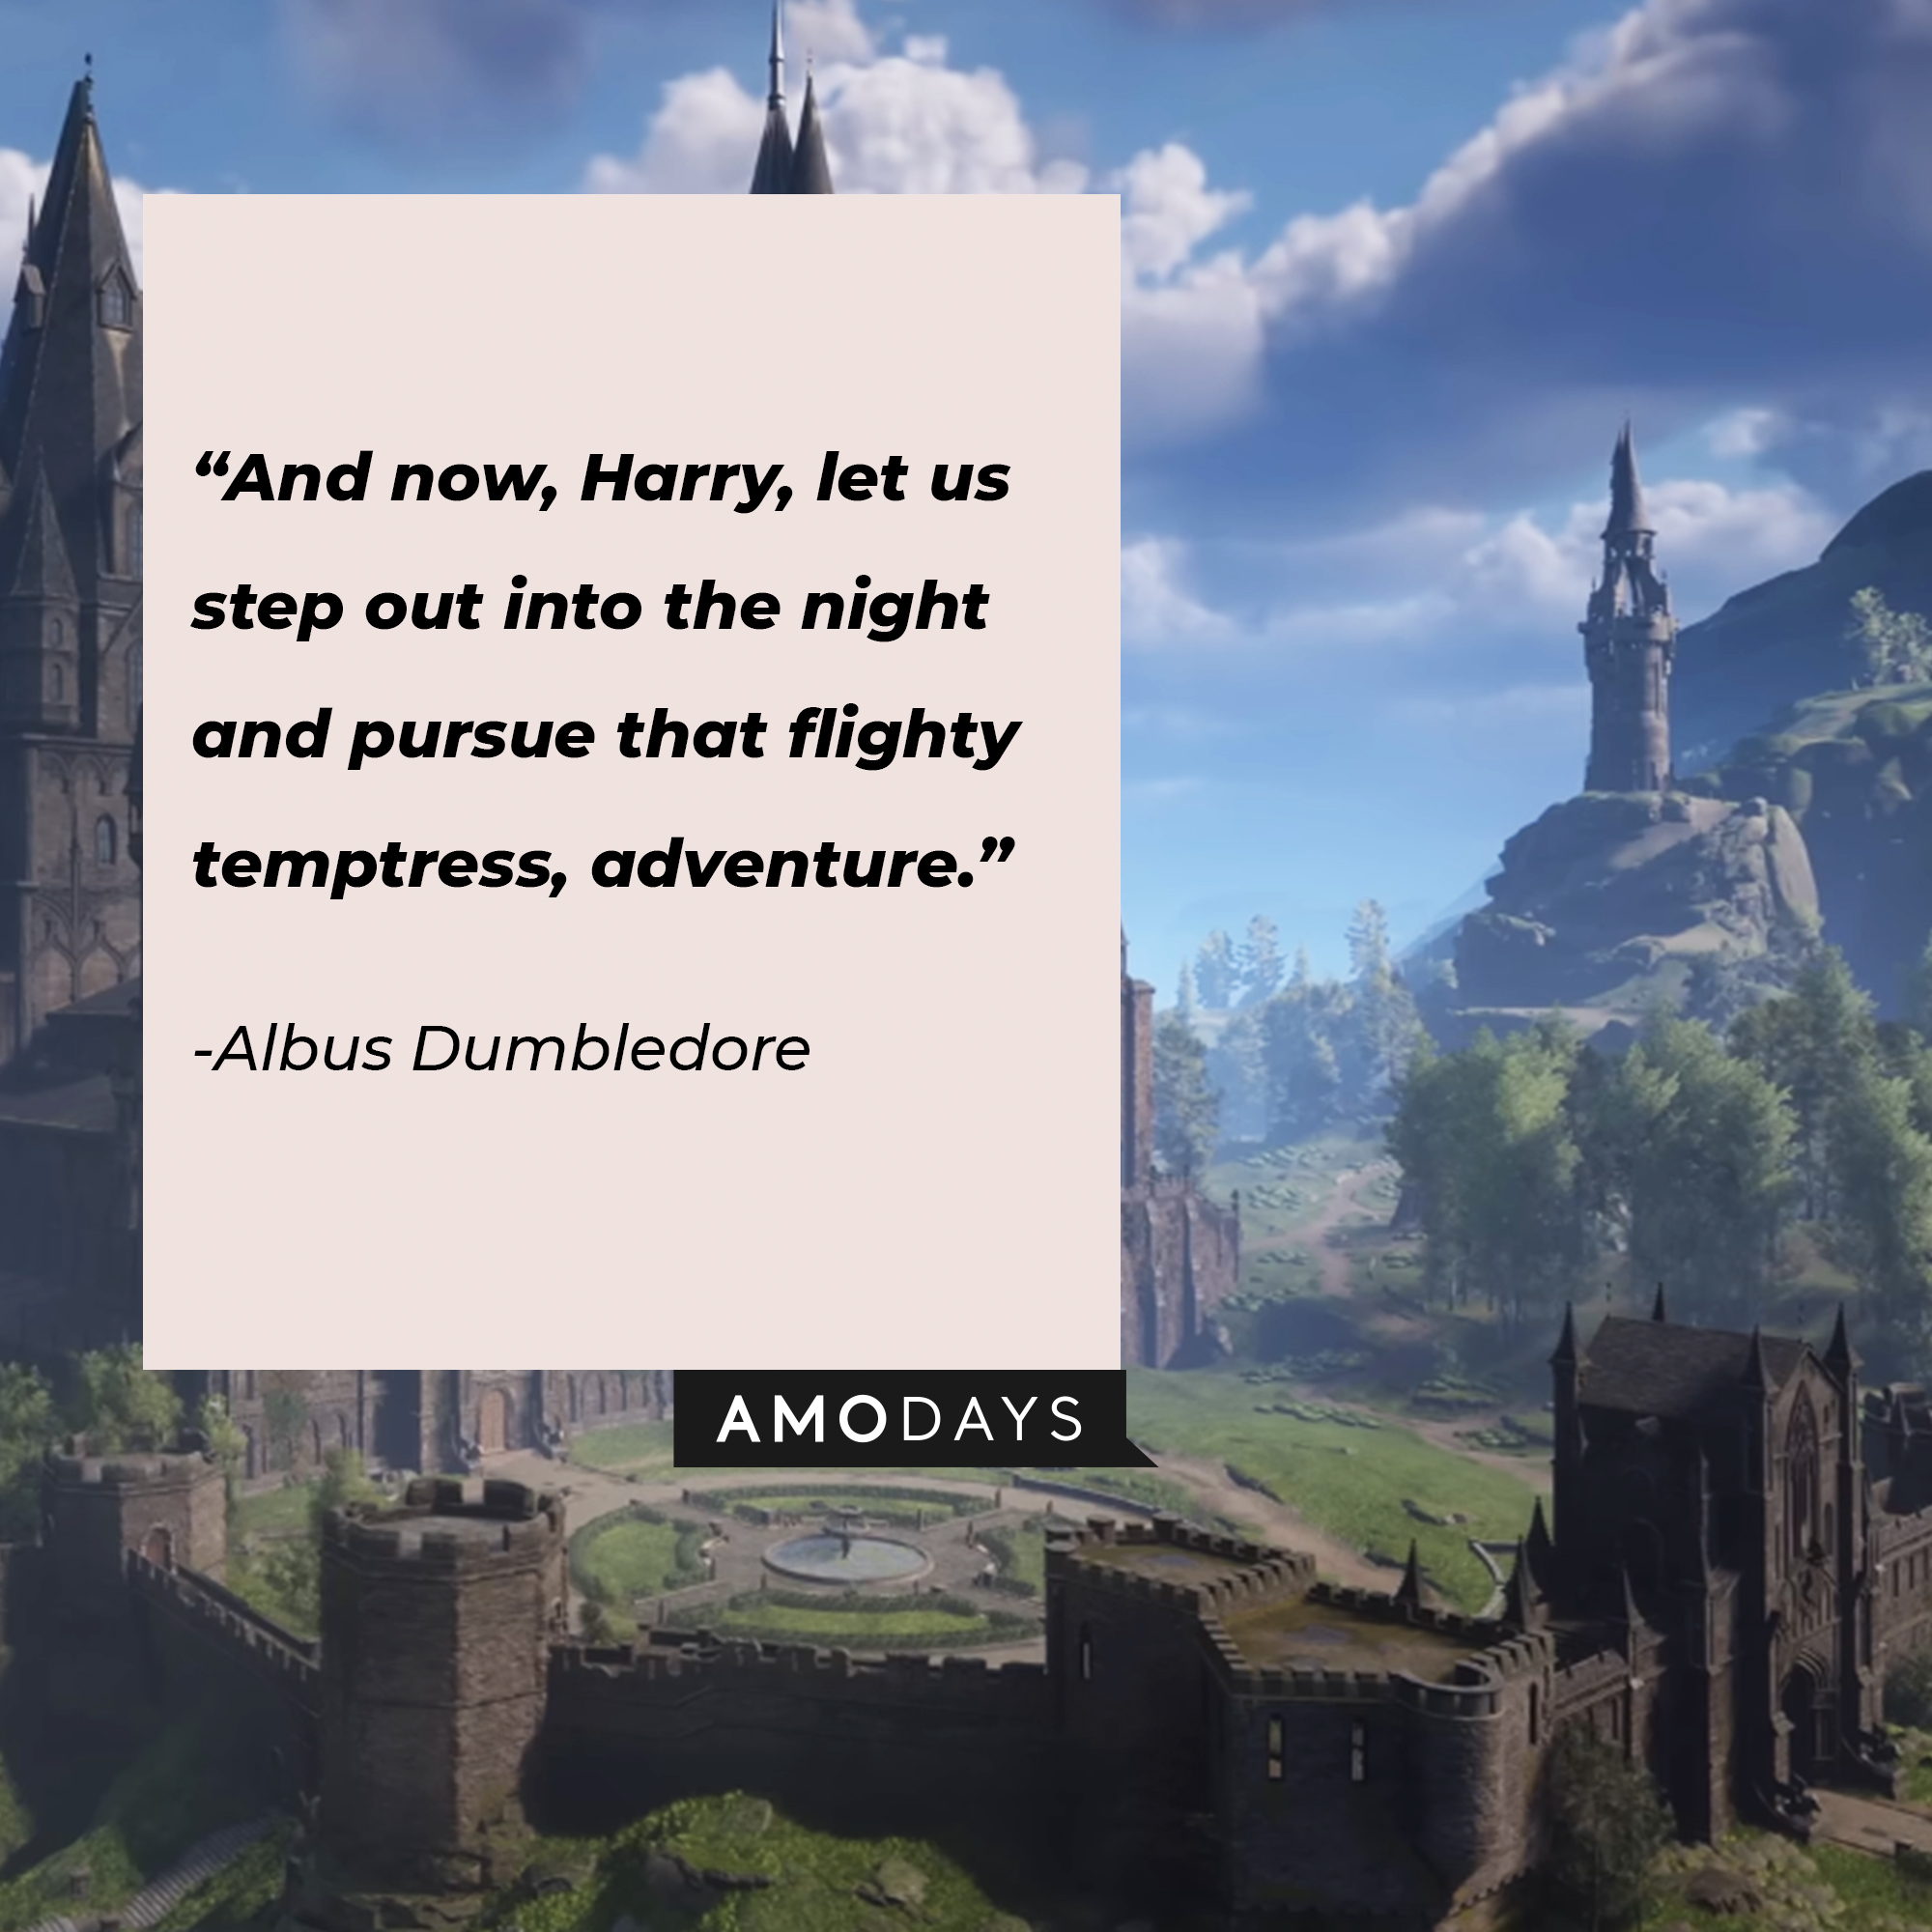 Albus Dumbledore's quote: "And now, Harry, let us step out into the night and pursue that flighty temptress, adventure." | Source: Youtube.com/HogwartsLegacy